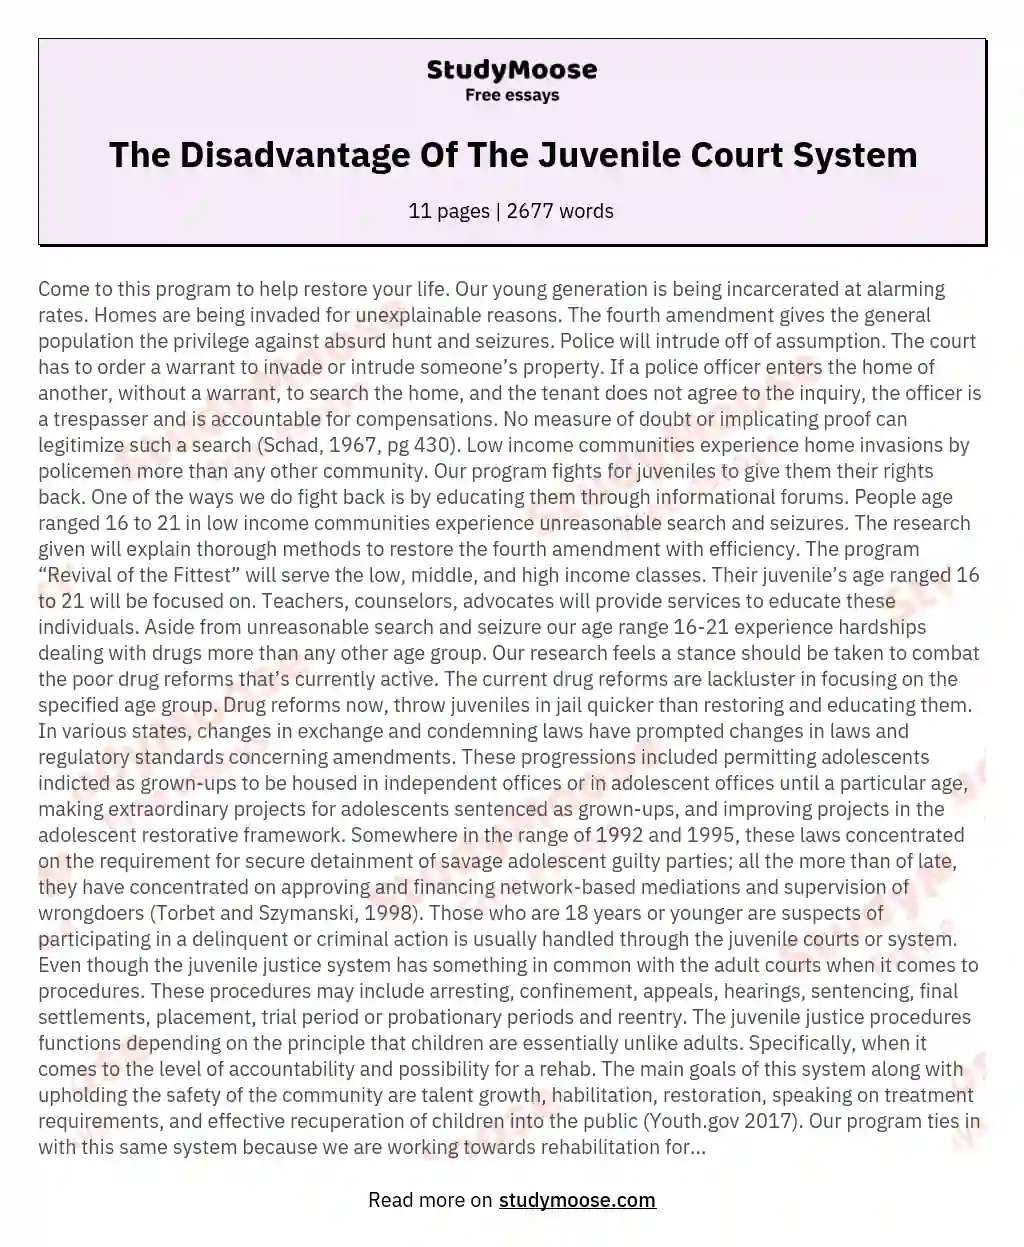 The Disadvantage Of The Juvenile Court System essay